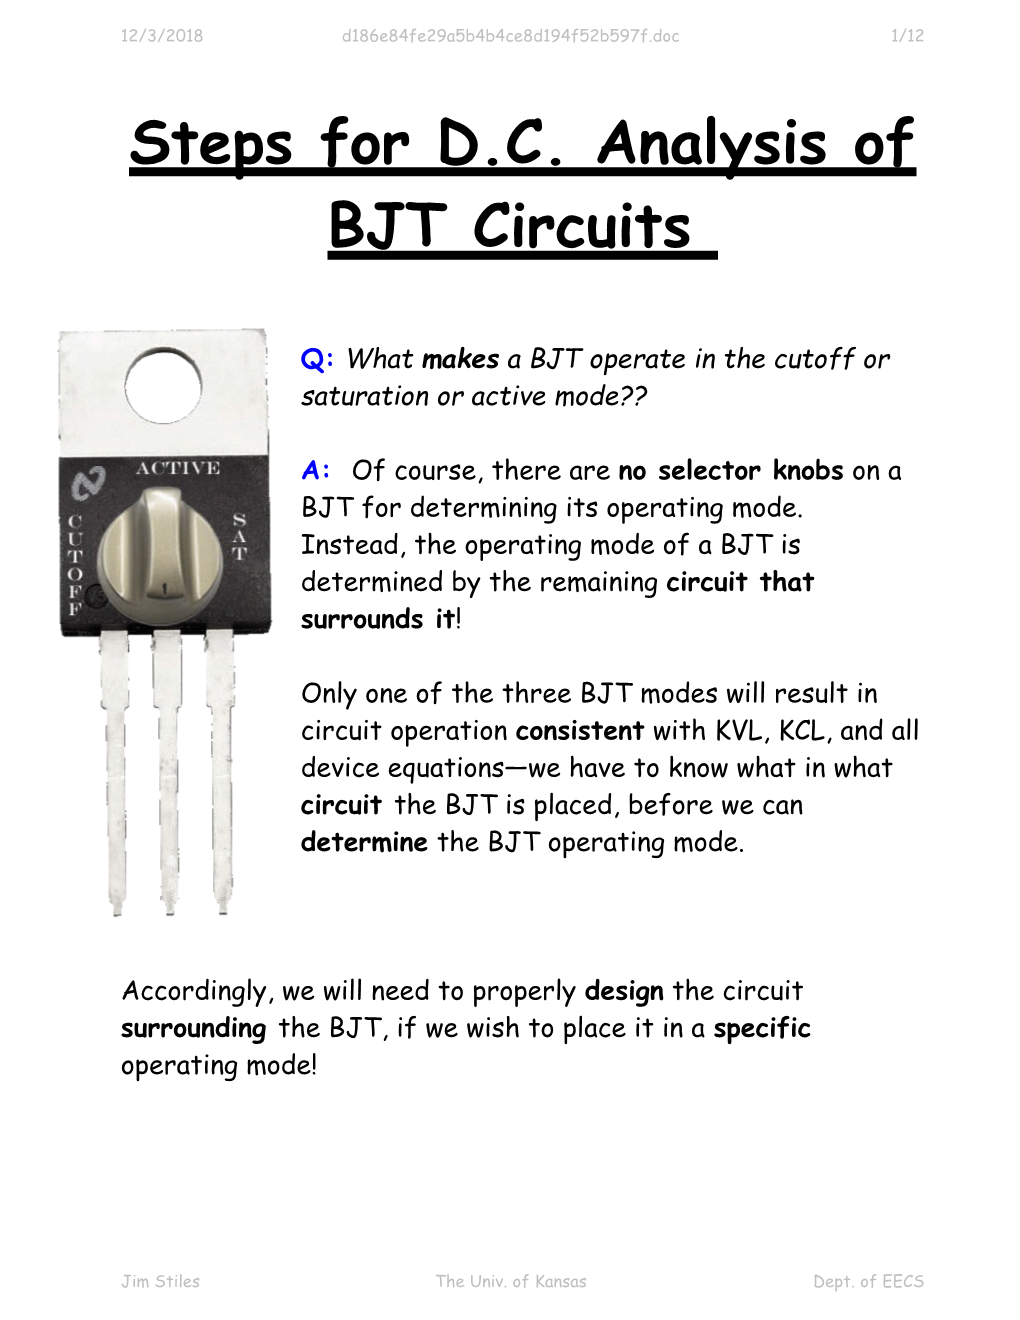 Steps for D.C. Analysis of BJT Circuits